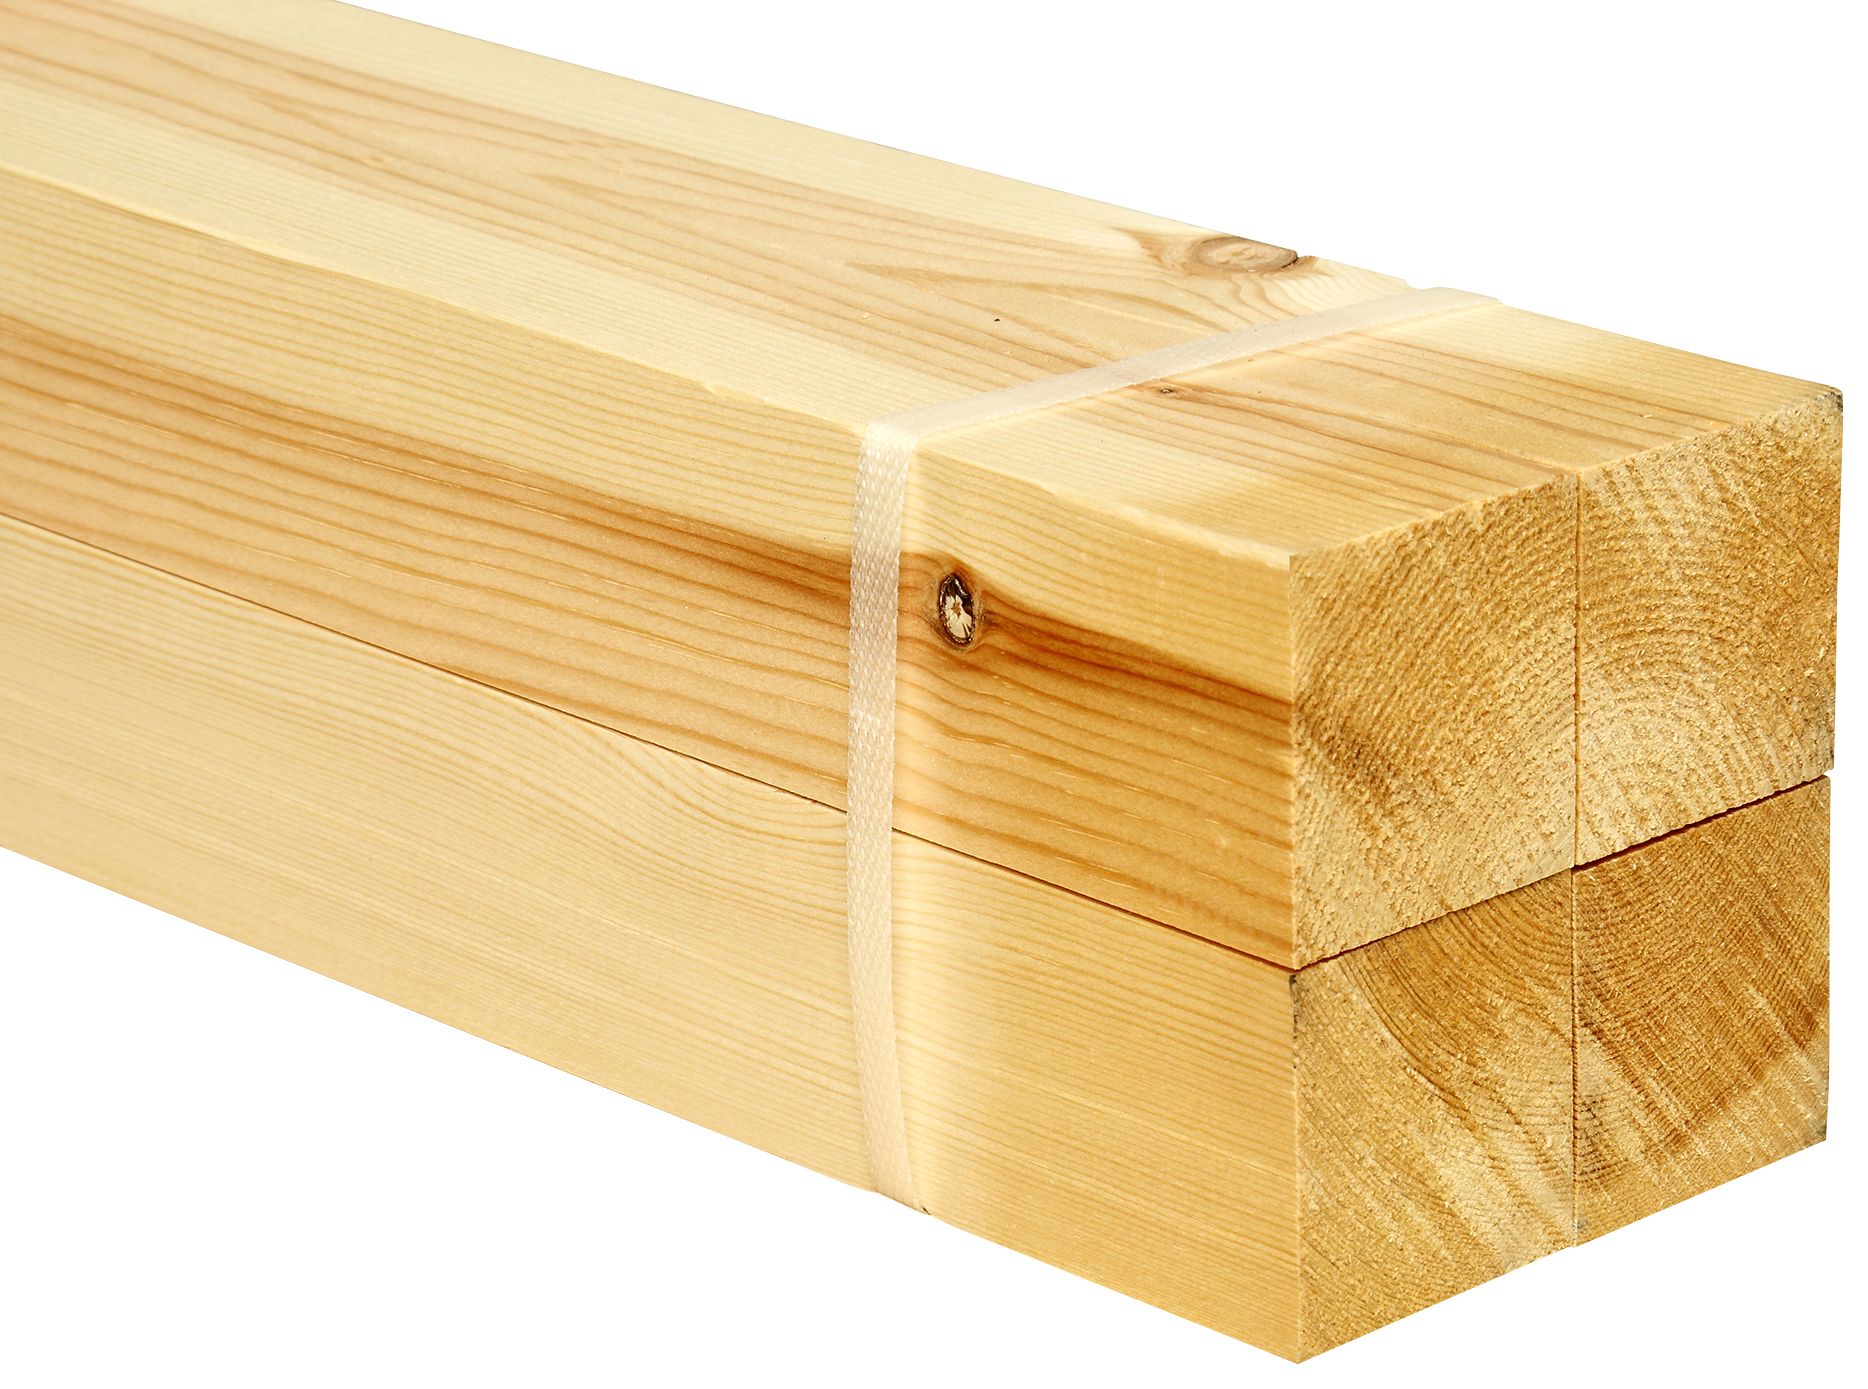 Image of Wickes Redwood PSE Timber - 44 x 44 x 2400mm - Pack of 4